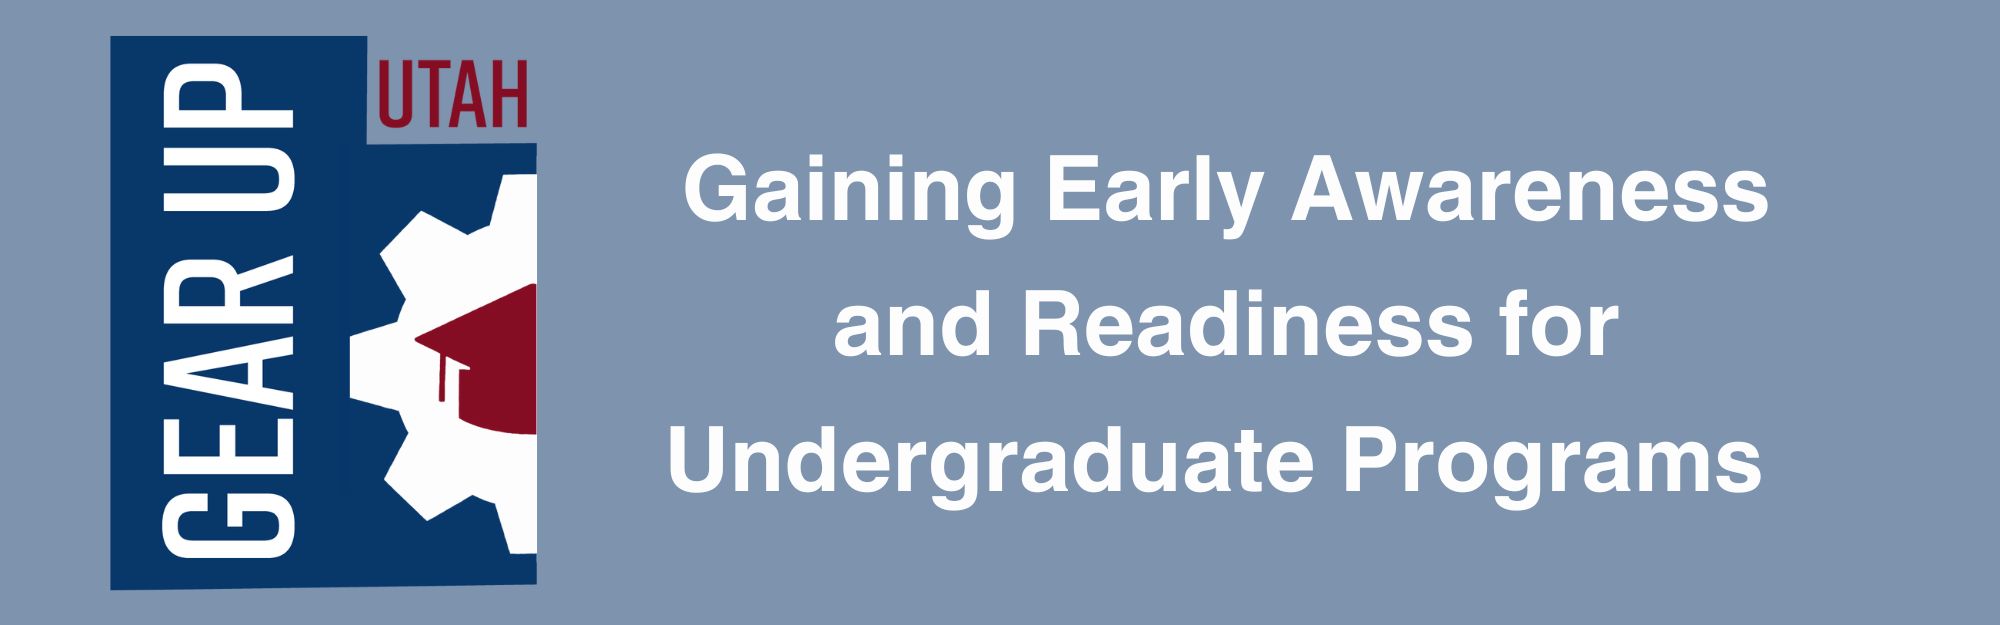 GEAR UP Gaining Early Awareness and Rediness for Undergraduate Programs